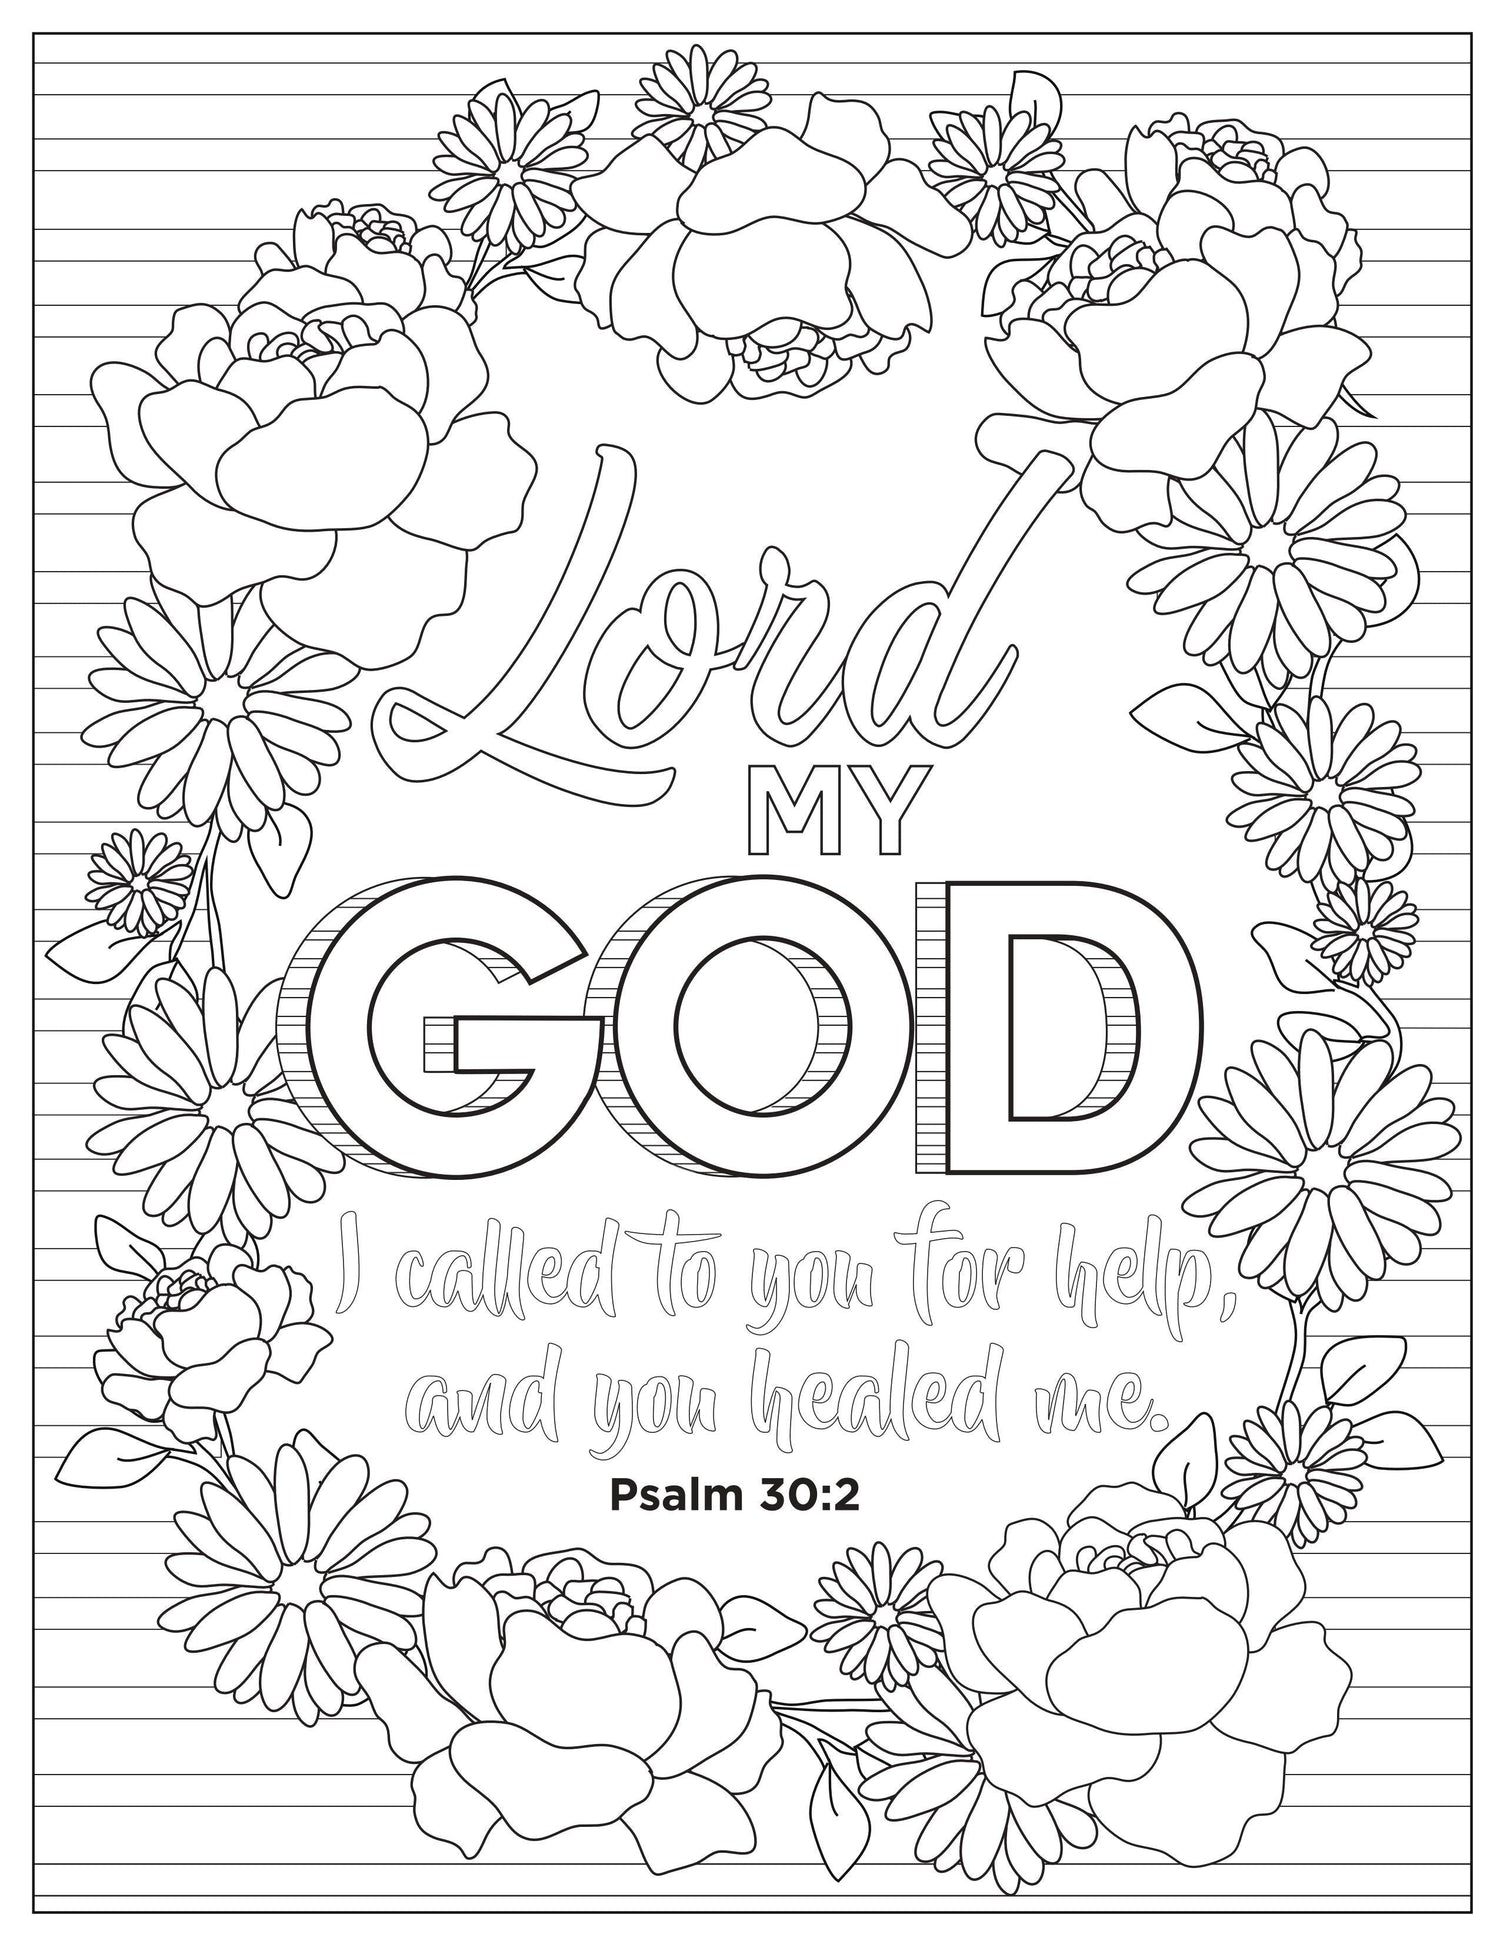 66 books of the bible coloring pages